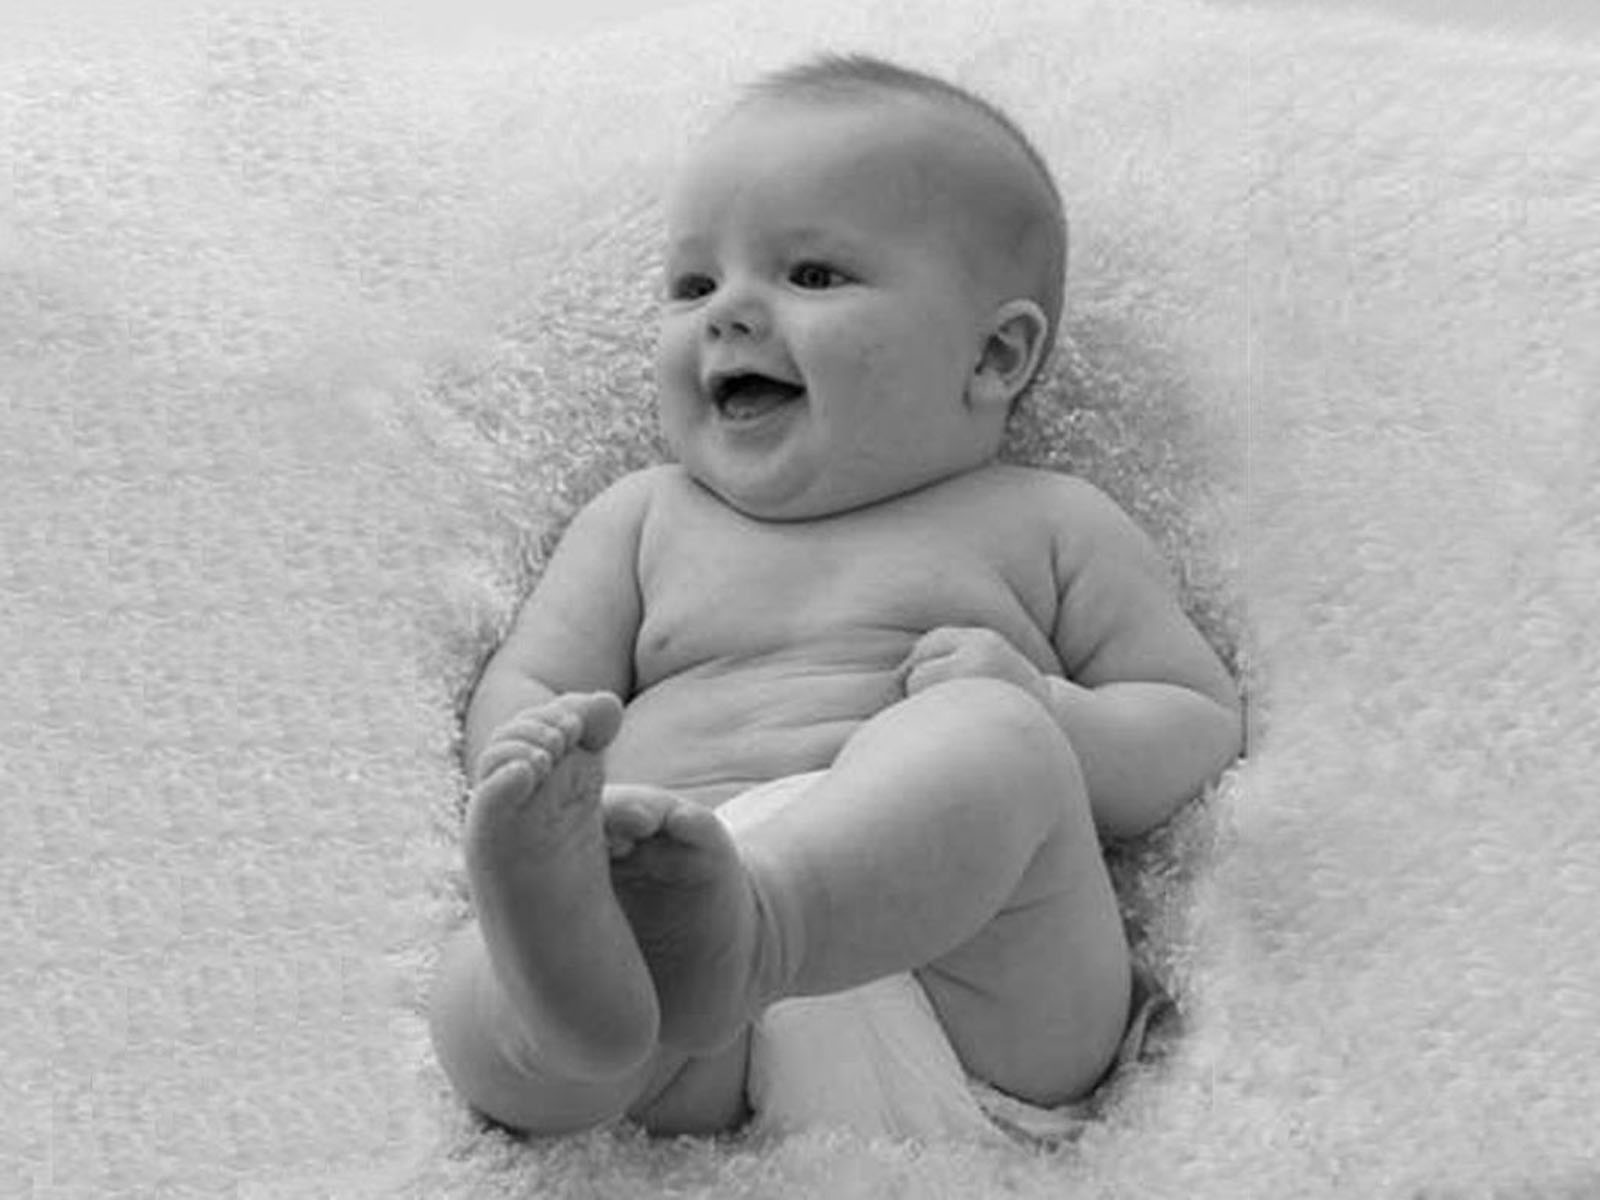 Tag Cute Babies Smiling Wallpaper Image Photos And Pictures For